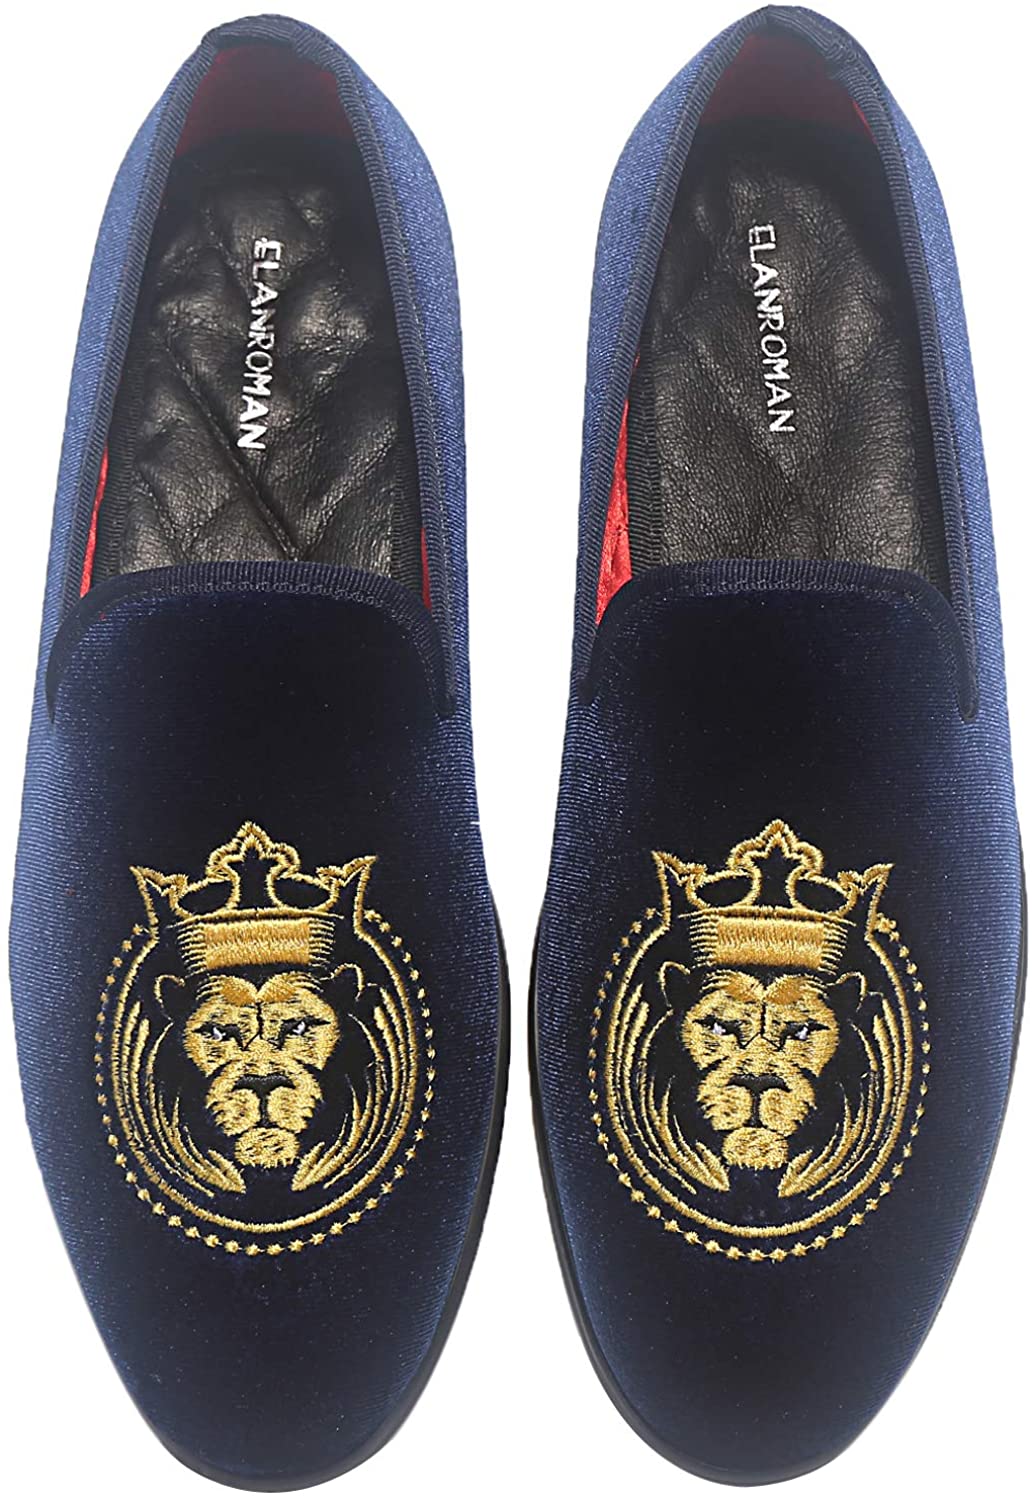 Details about   ELANROMAN Loafers for Men Velvet Shoes of Fashion Embroidered 1.0 and 2.0 Party 